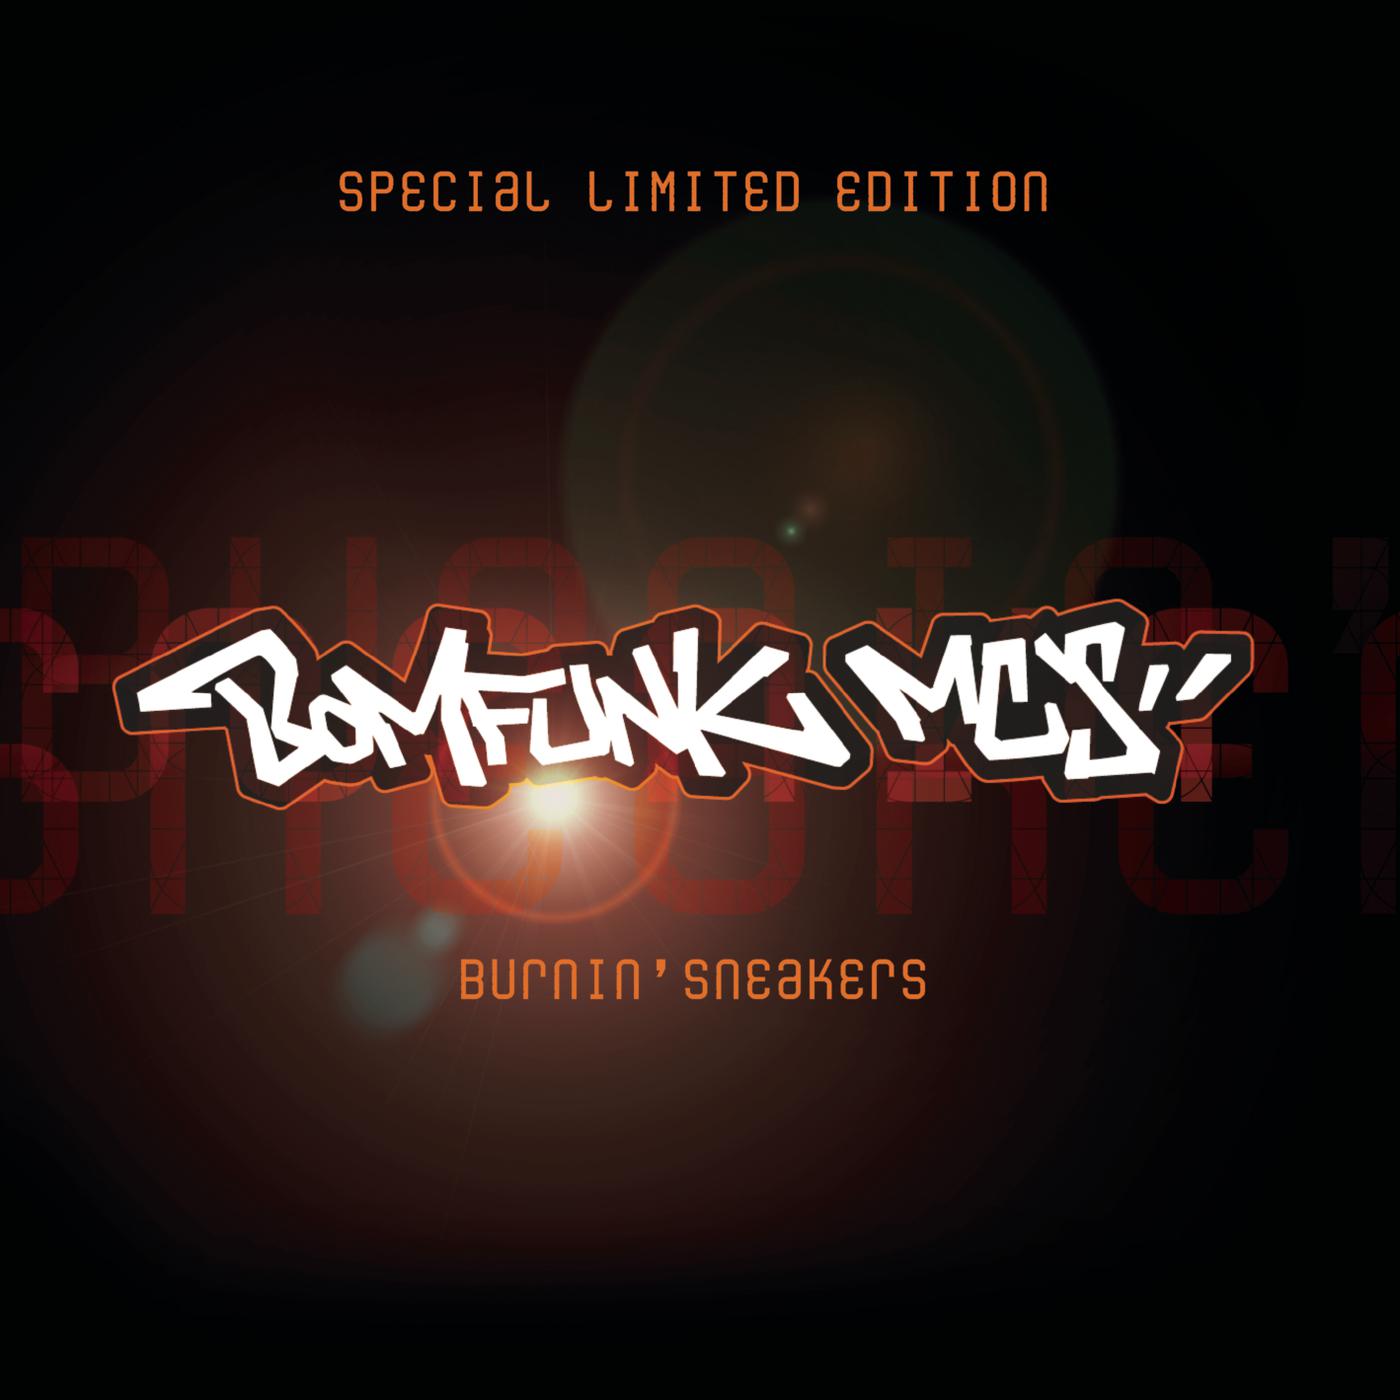 Limited special. Bomfunk MC'S. Burnin' Sneakers. Bomfunk MC'S 2002. Bomfunk MC'S лого.